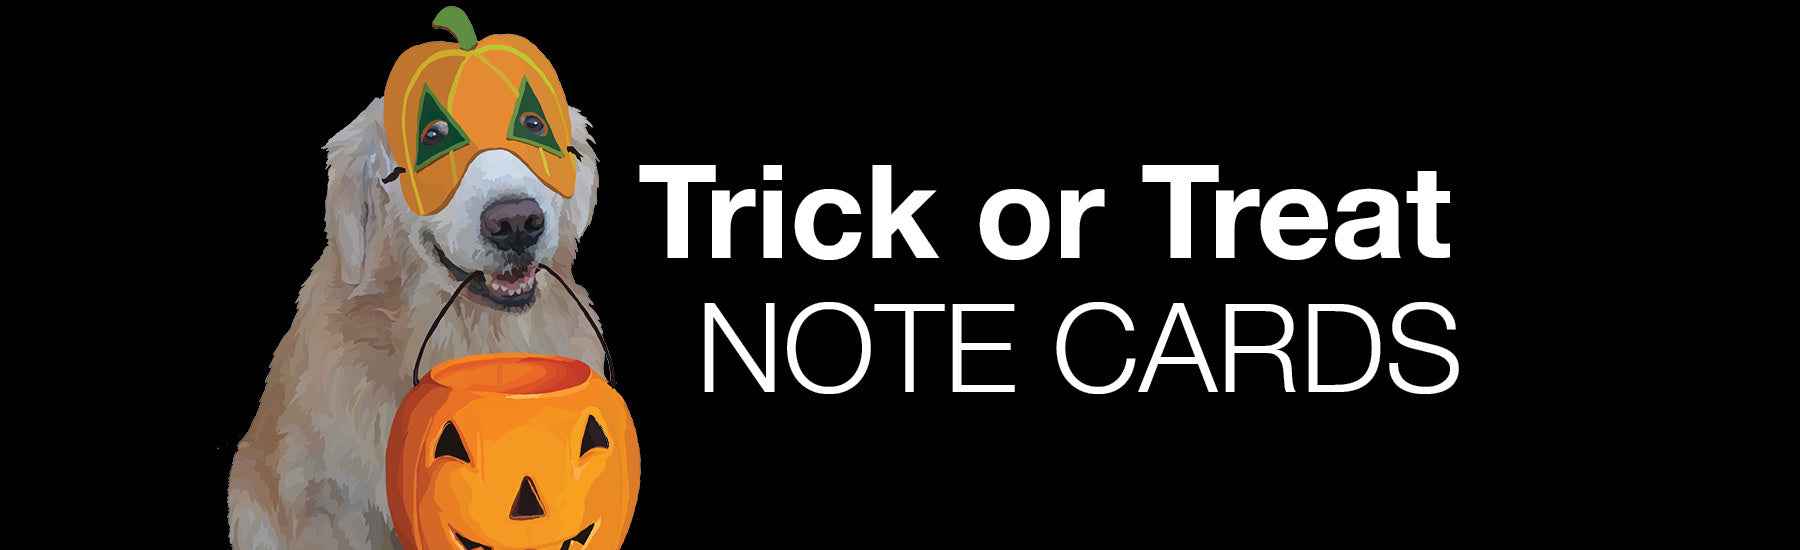 HALLOWEEN NOTE CARDS